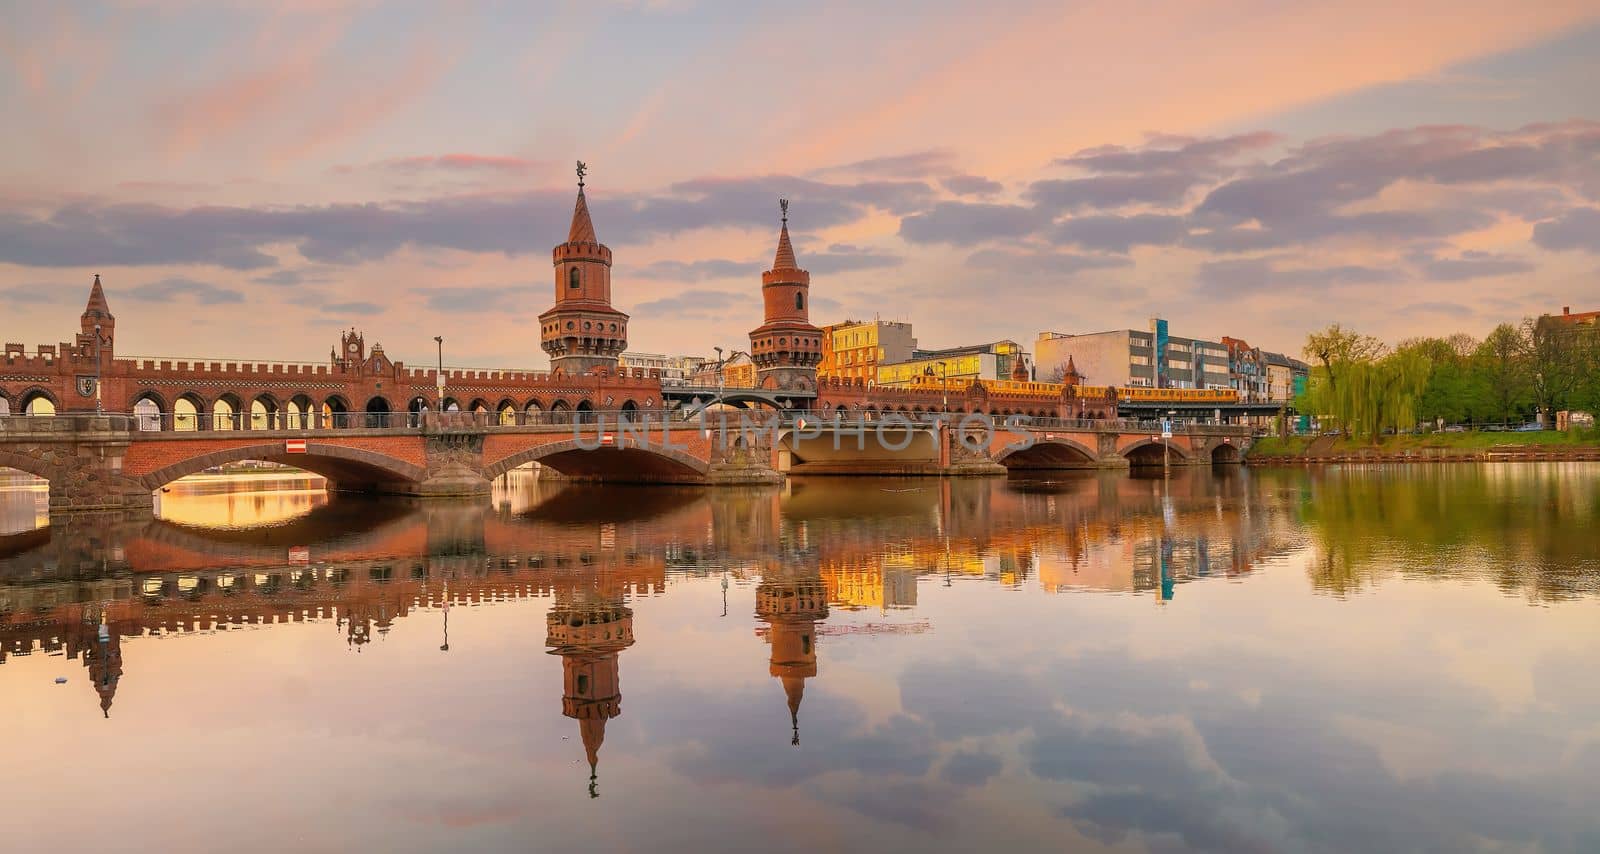 Berlin city skyline at Oberbaum Bridge and Spree River in Germany at sunset